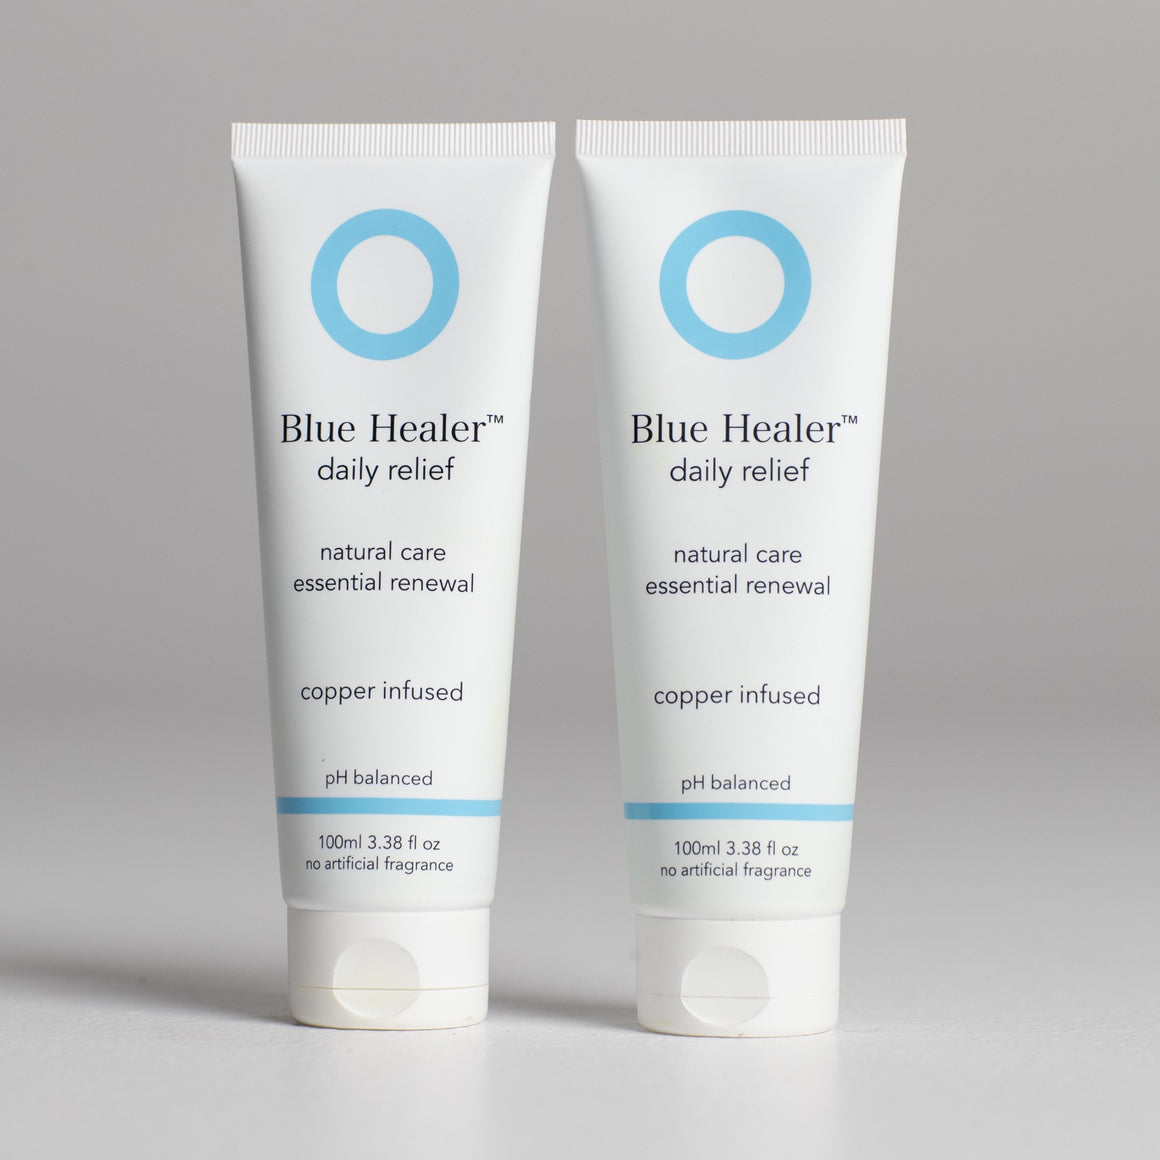 Two Blue Healer Daily Relief cream products, each 100 ml in a value two pack for frequent users and value shoppers. Regular daily use builds results so apply for maintenance of youthful skin and  use often for pain relief or soreness after sports or injury. Apply before bed to awake without usual soreness. Sensitive for all ages. Vegan.